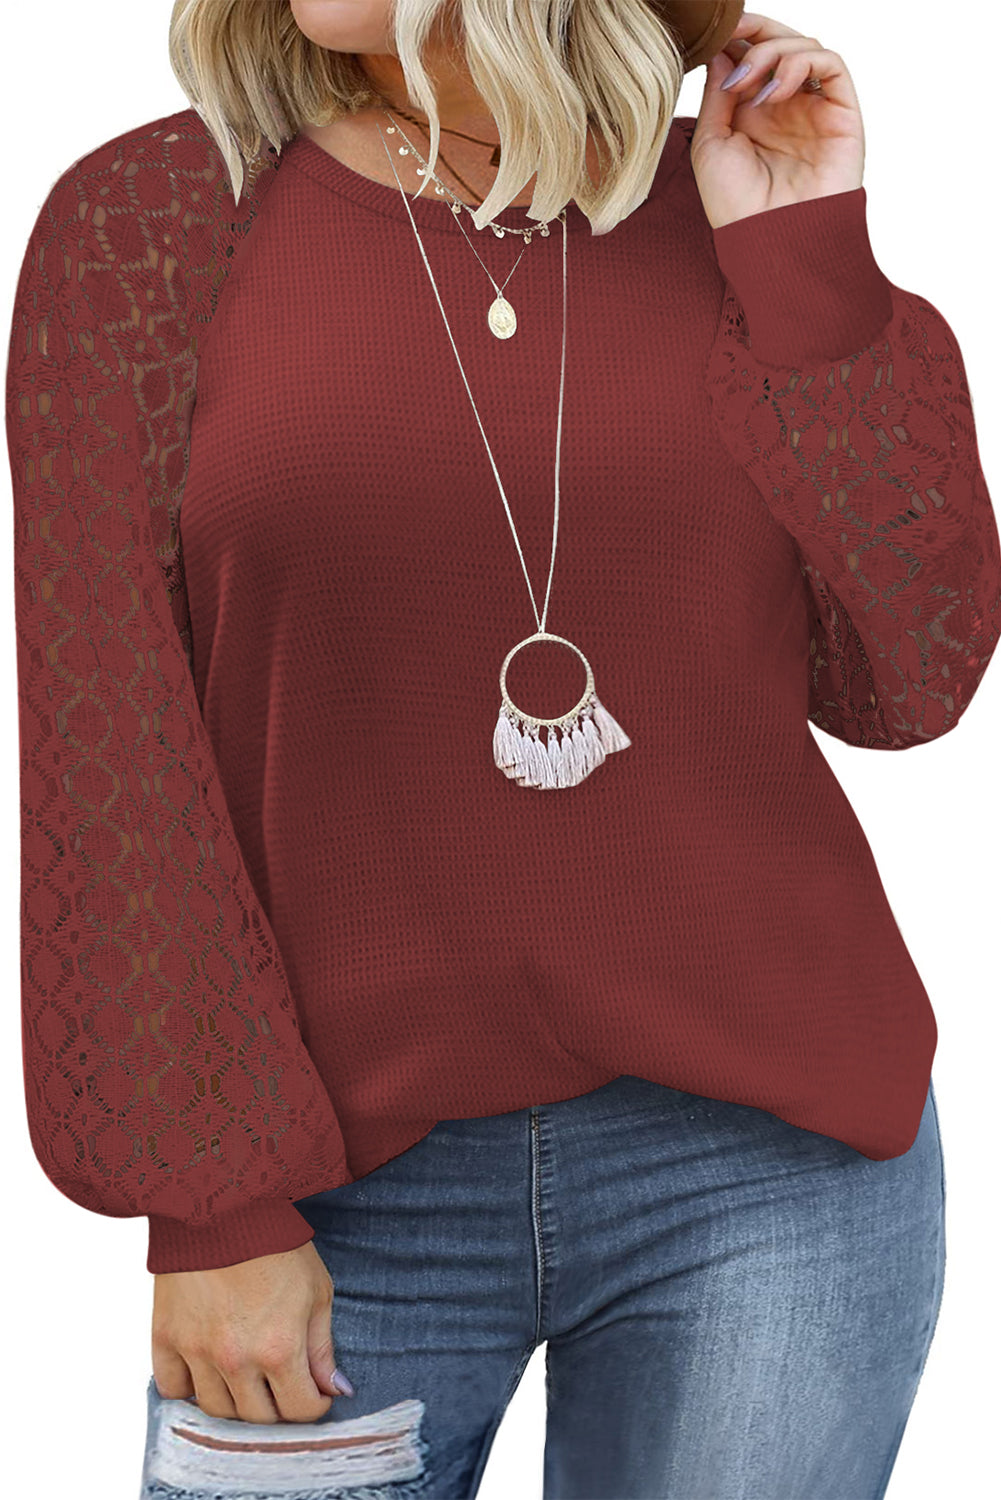 Contrast Lace Sleeve Waffle Knit Top